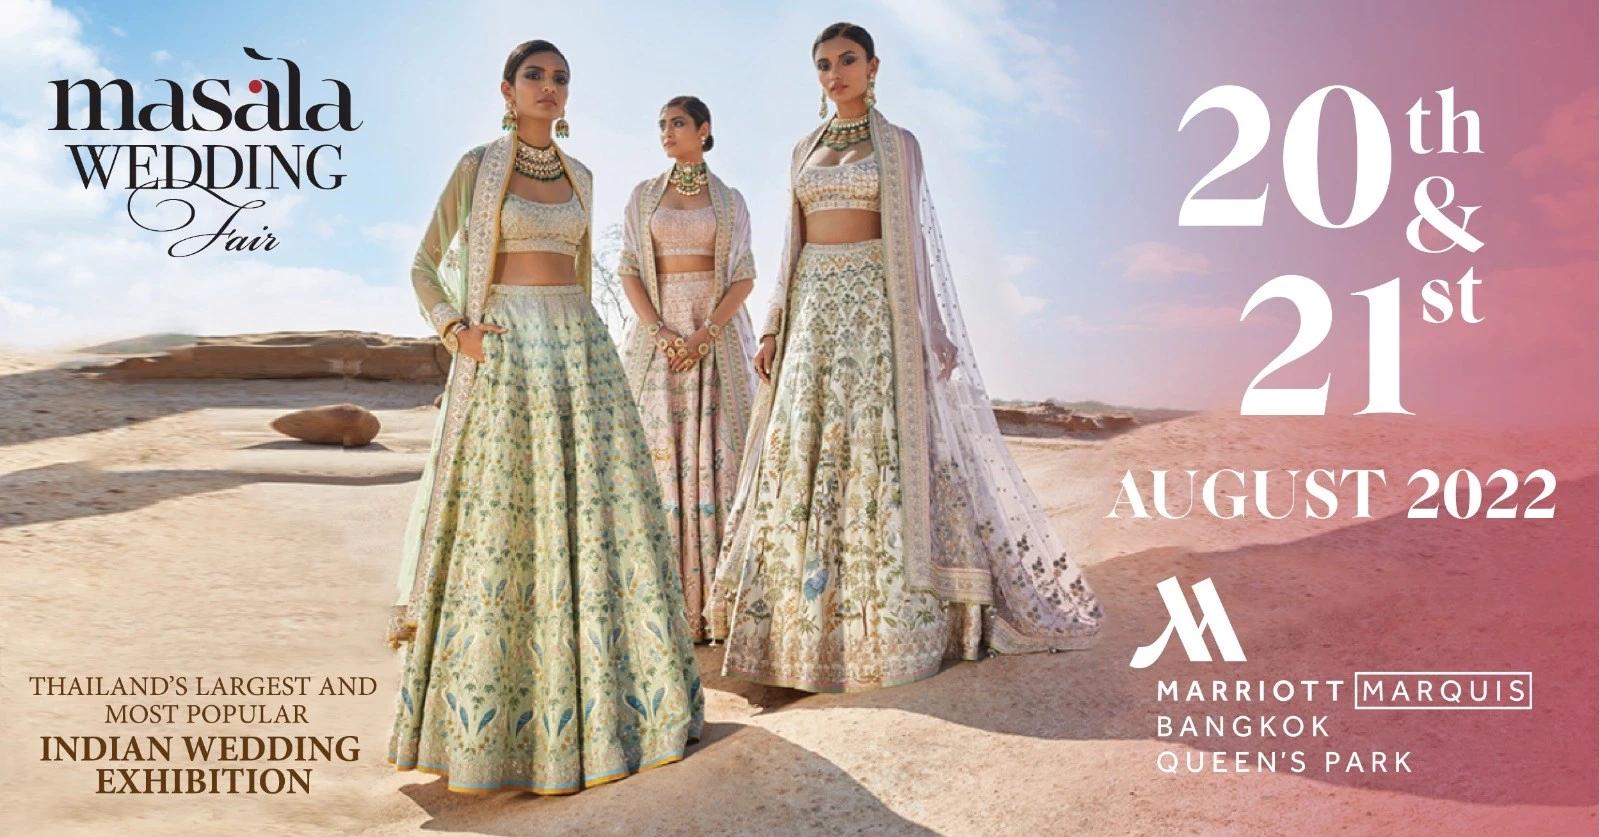 The Masala Wedding Fair is back, and better than ever!